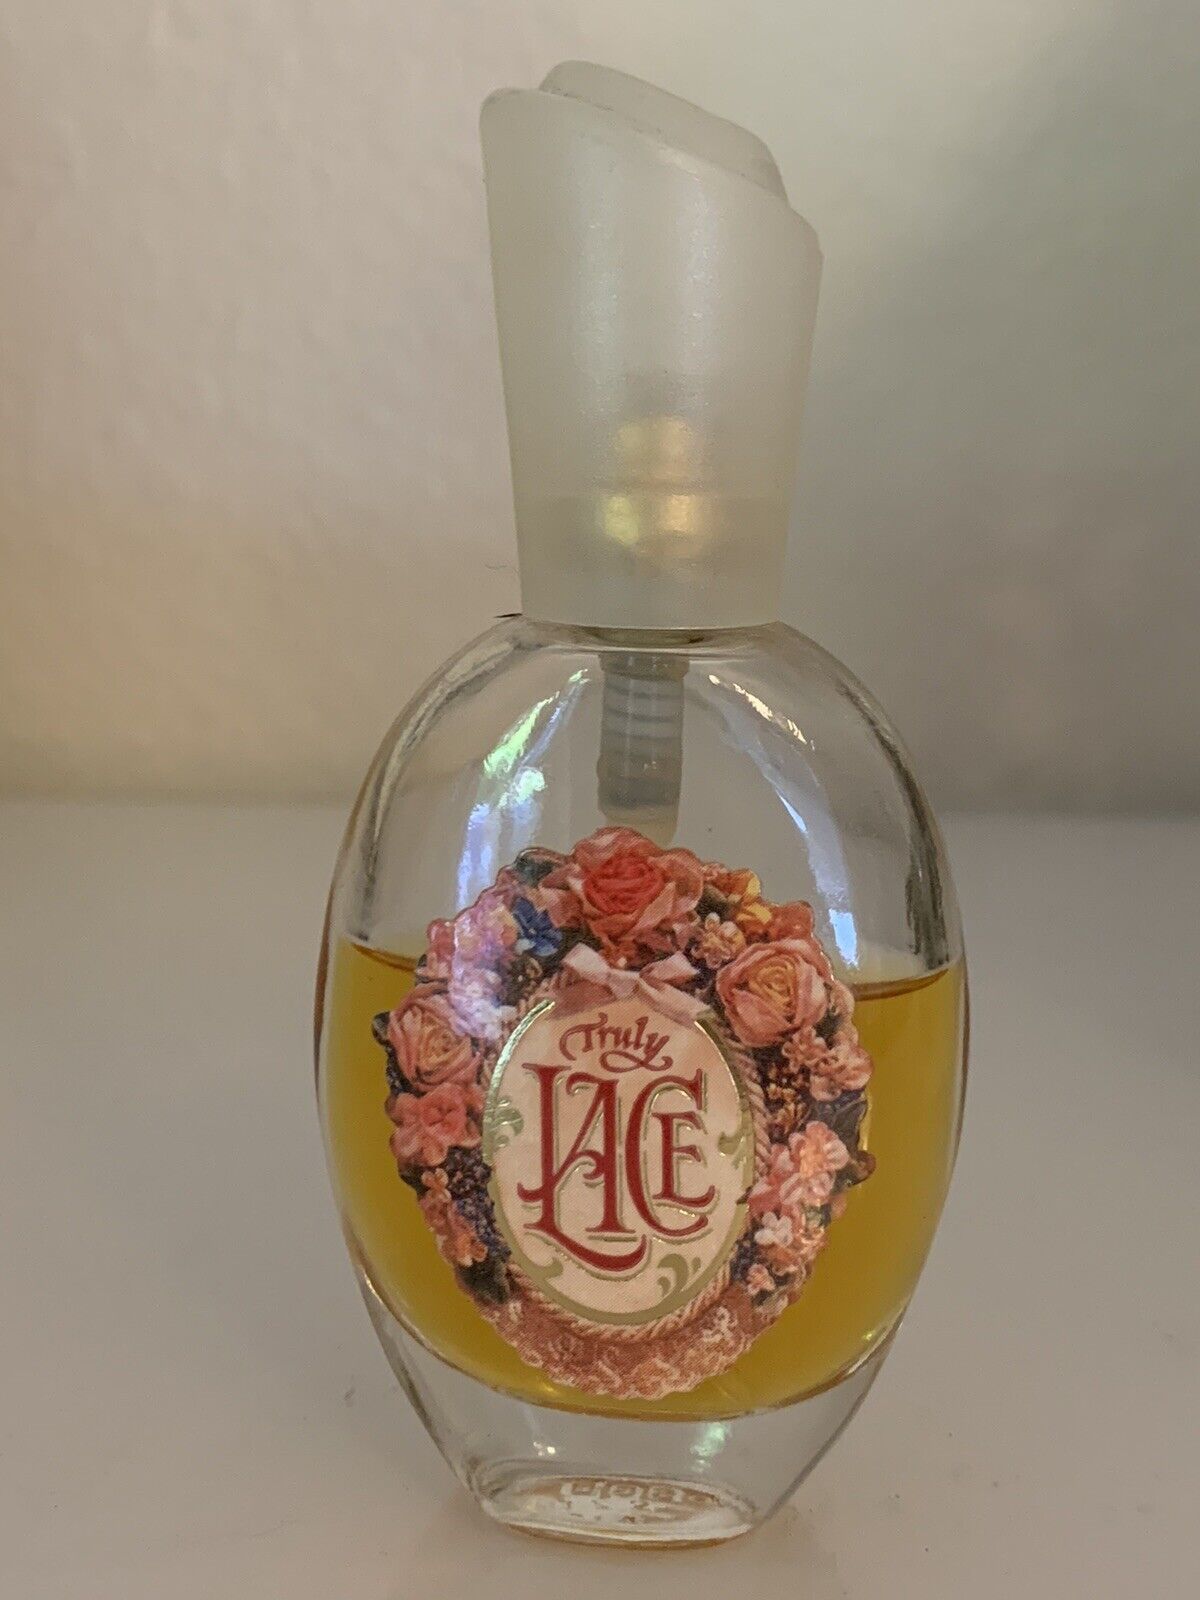 Pre-owned VTG Coty Truly Lace Cologne Spray .75 oz 70% full discontinued perfume